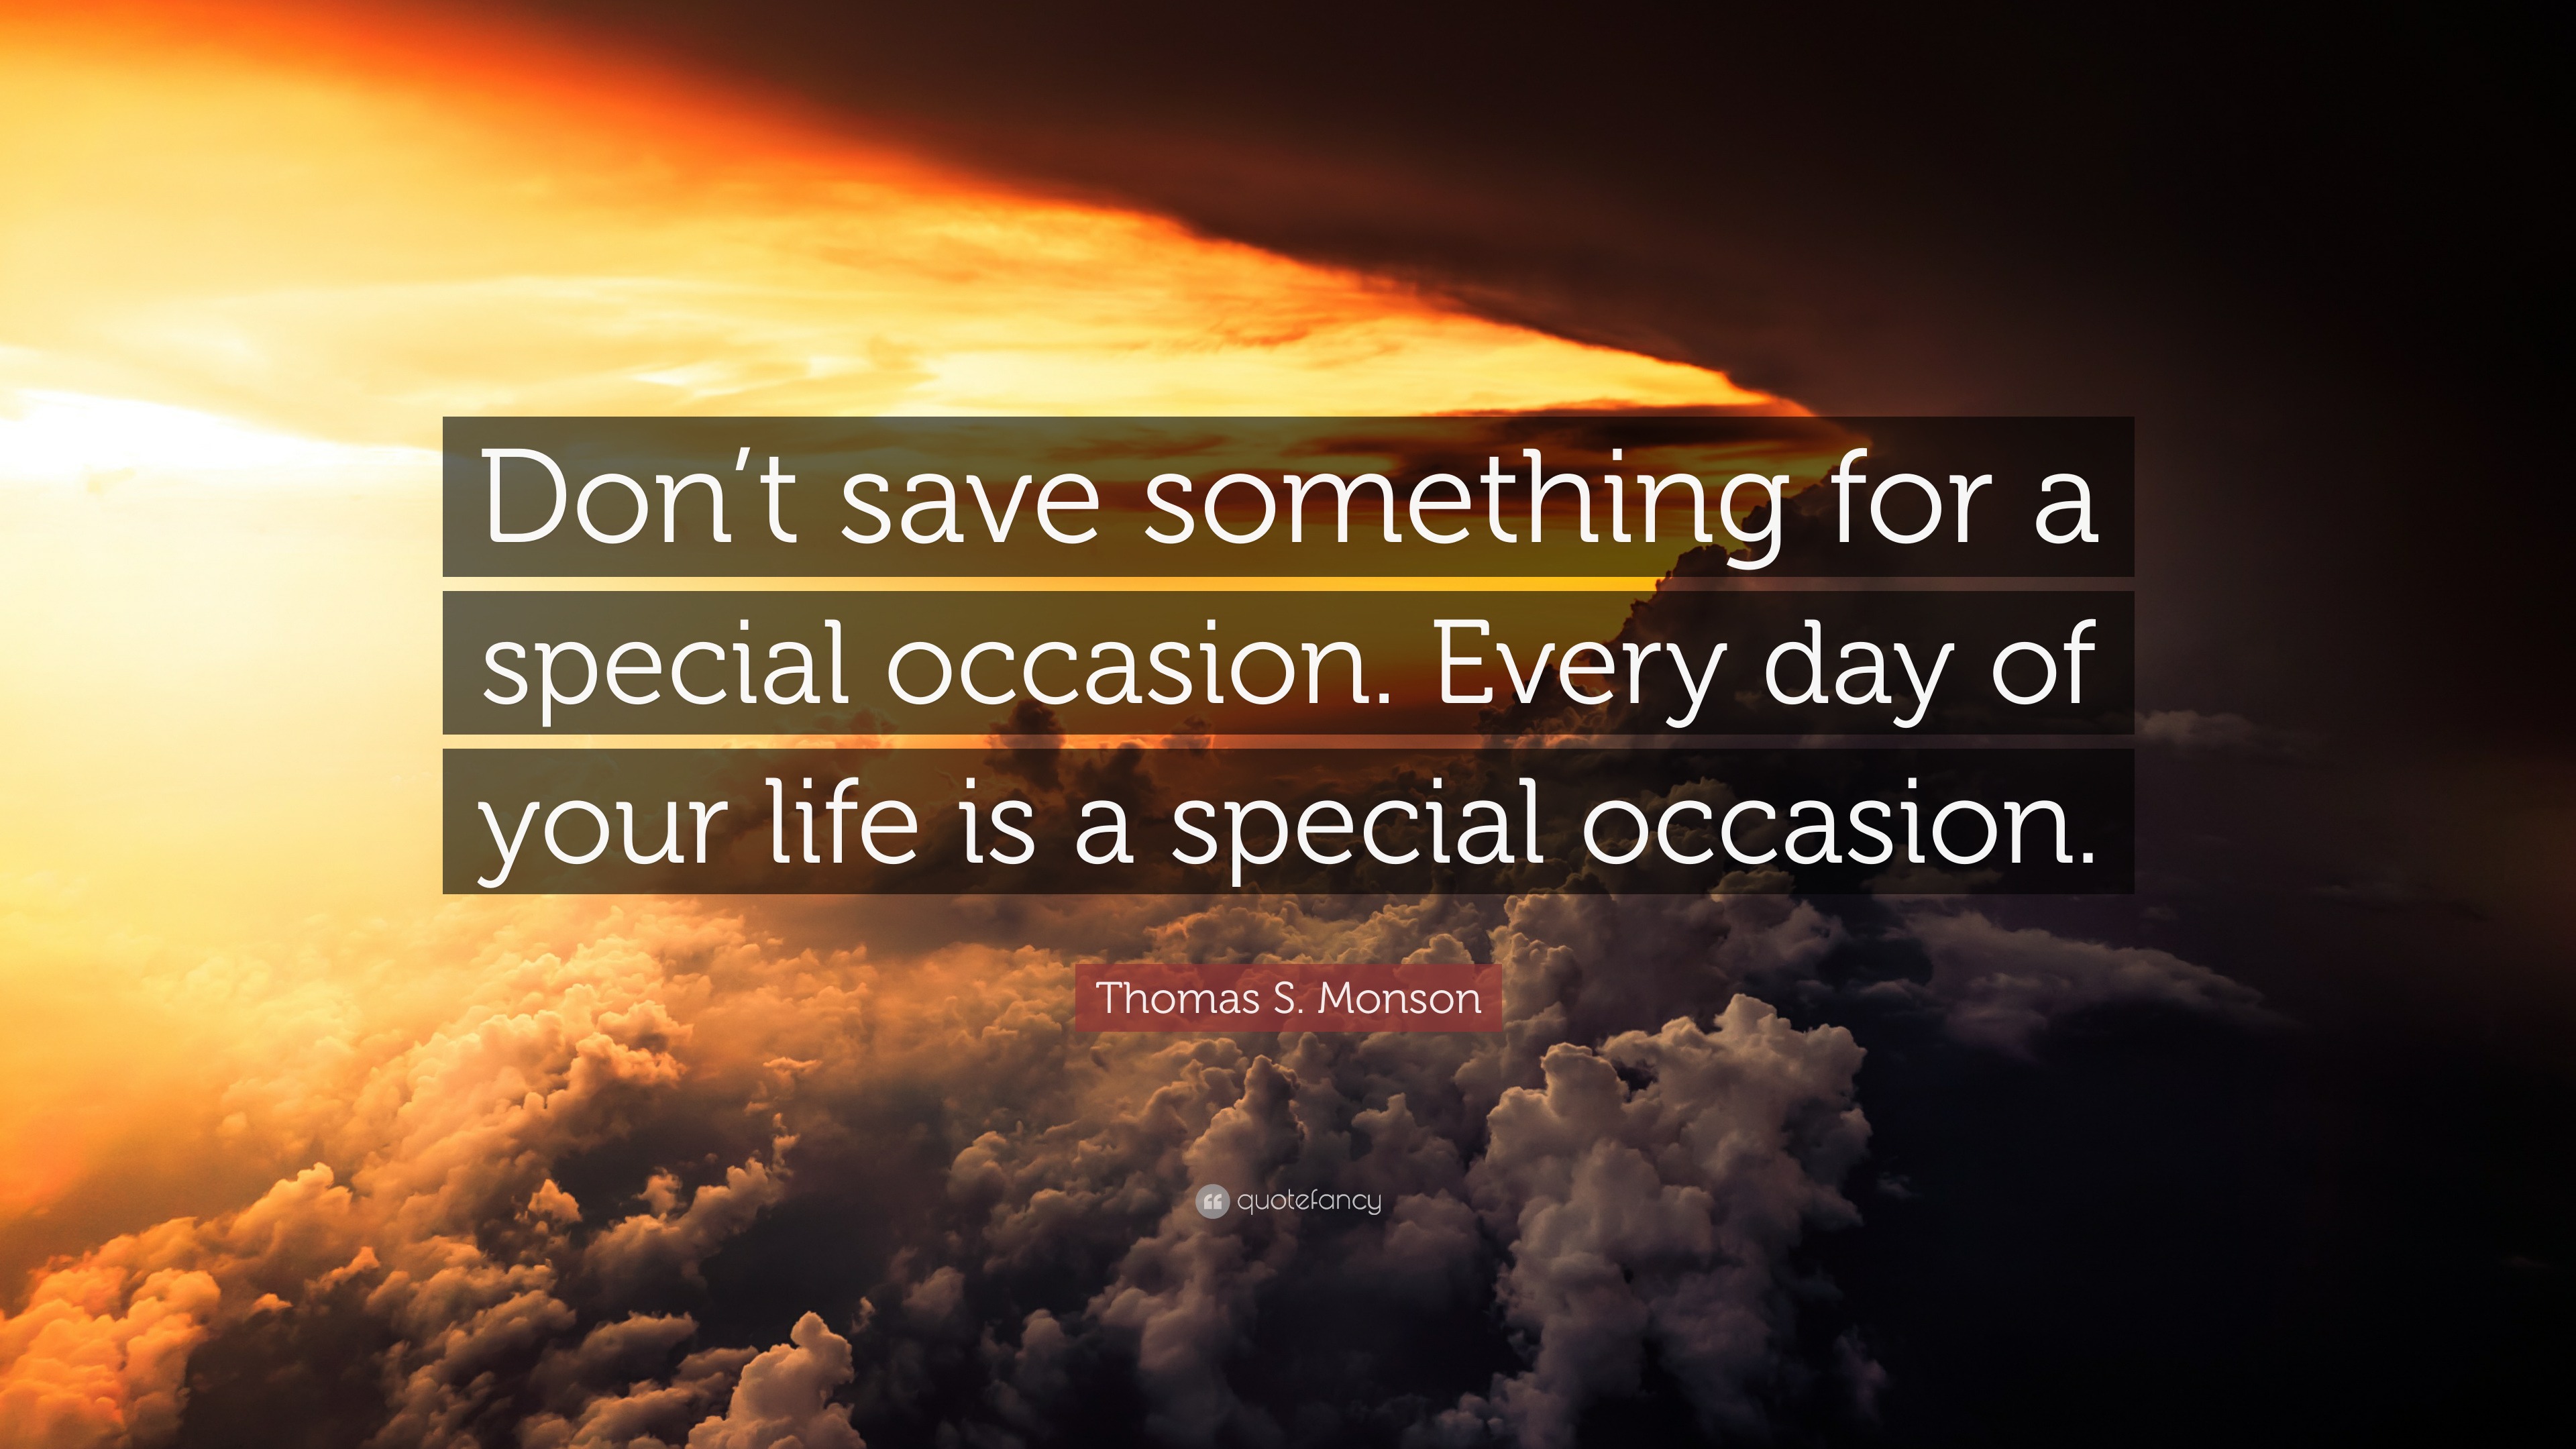 Thomas S. Monson Quote: “Don't save something for a special